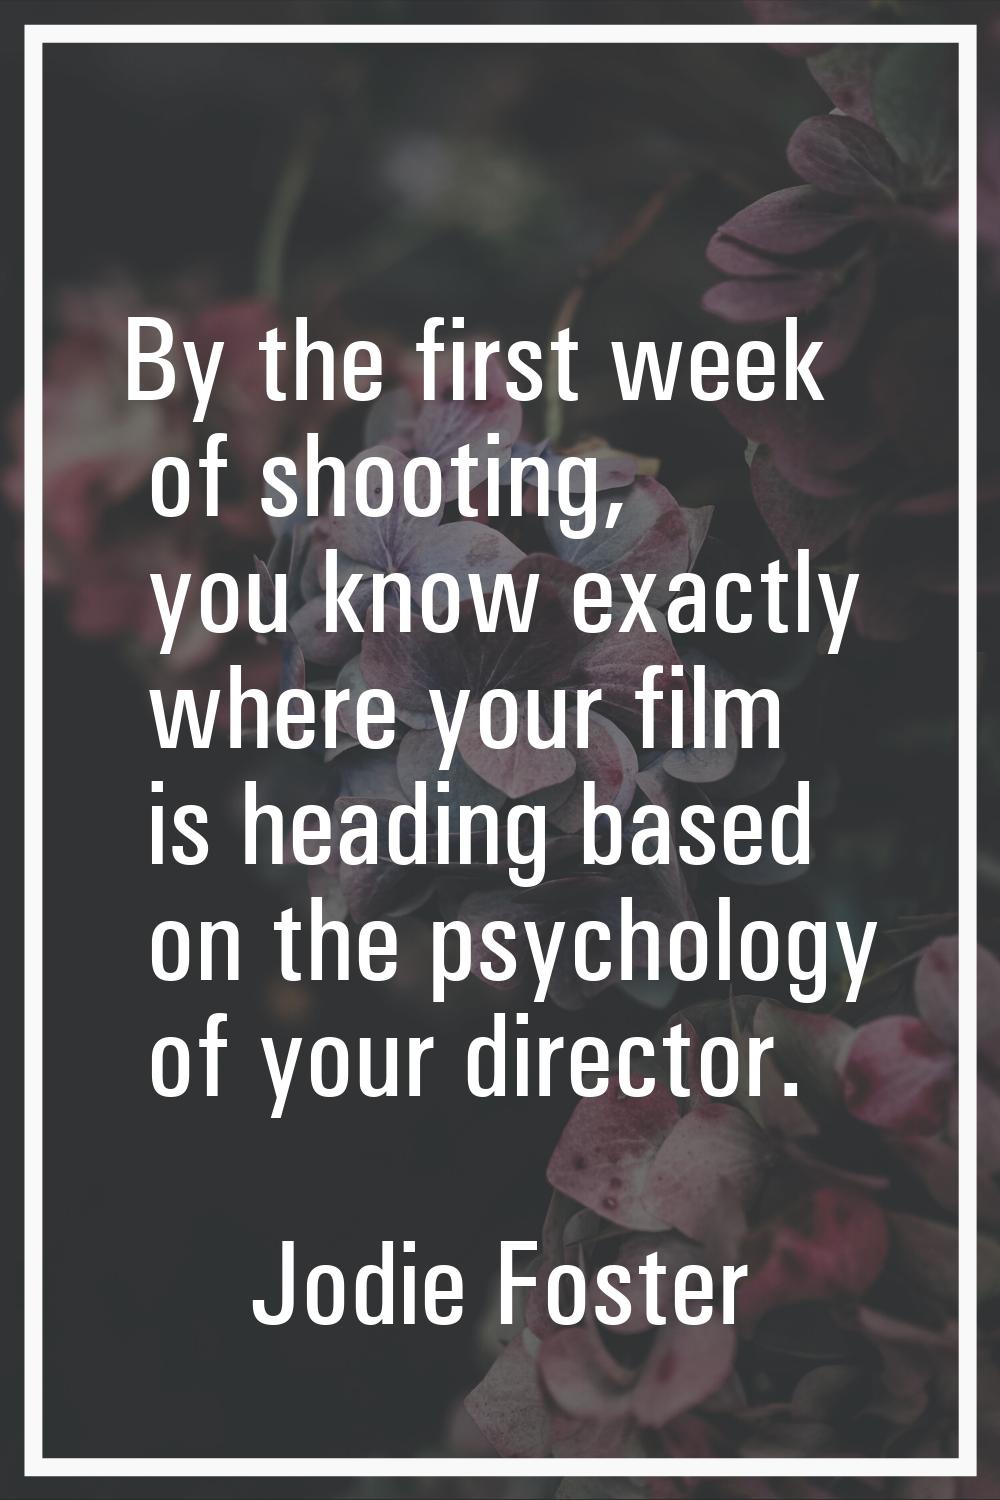 By the first week of shooting, you know exactly where your film is heading based on the psychology 